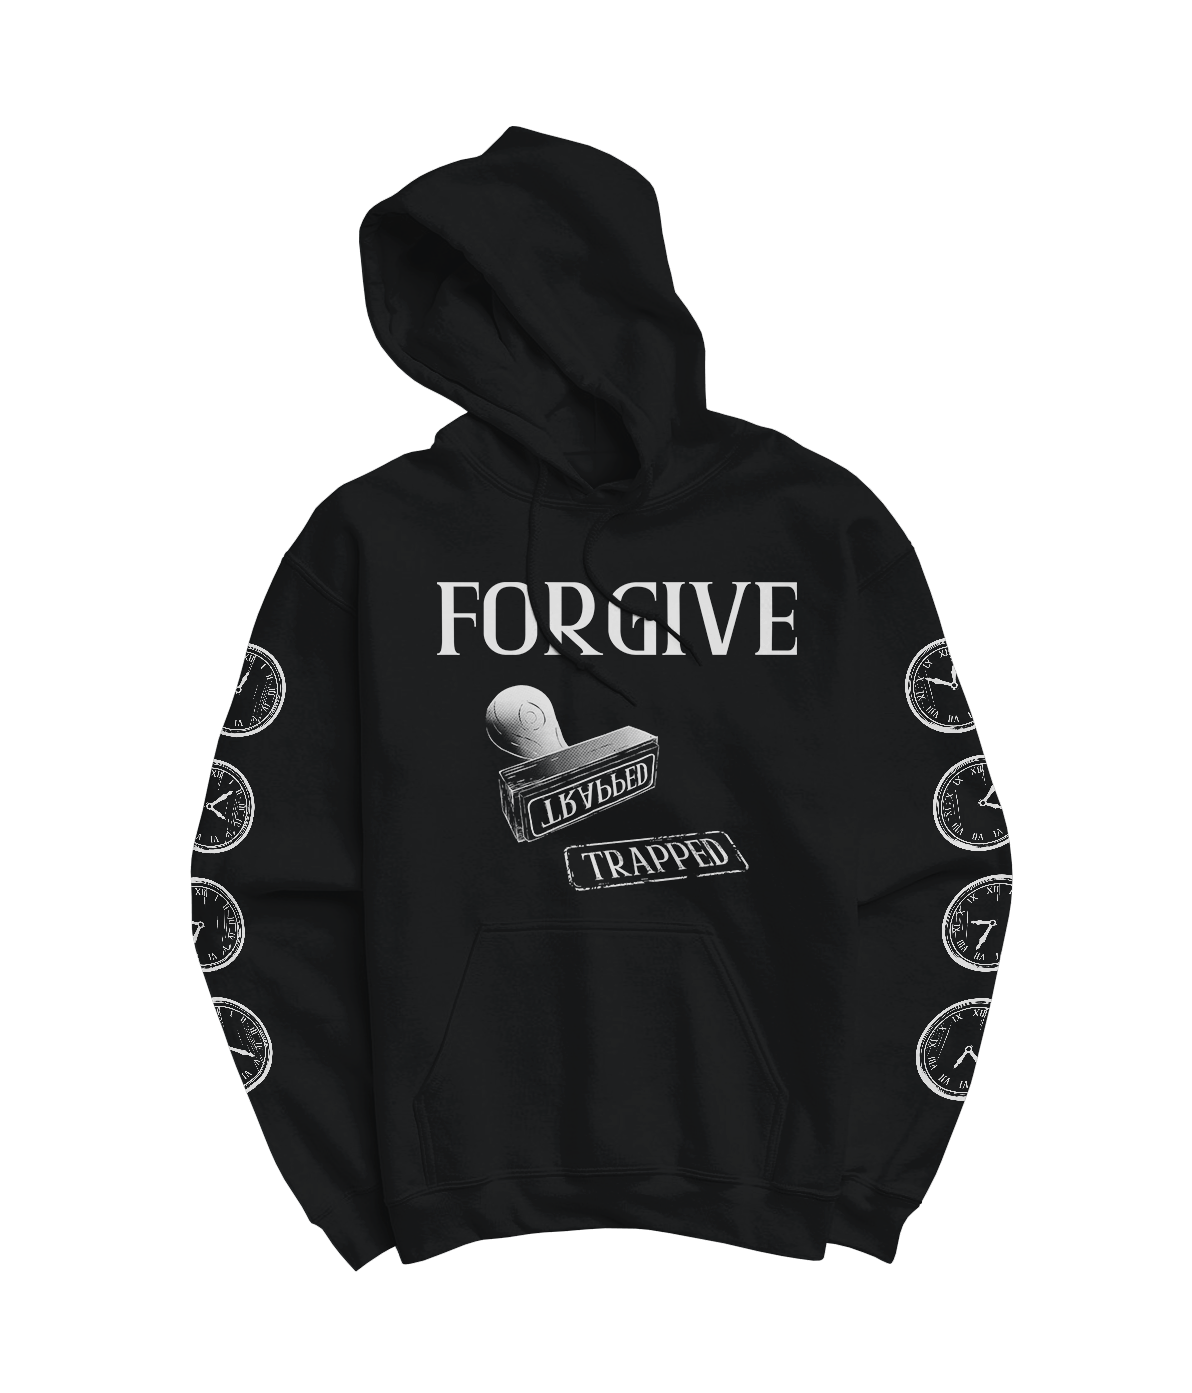 FORGIVE "Trapped" Black Hoodie